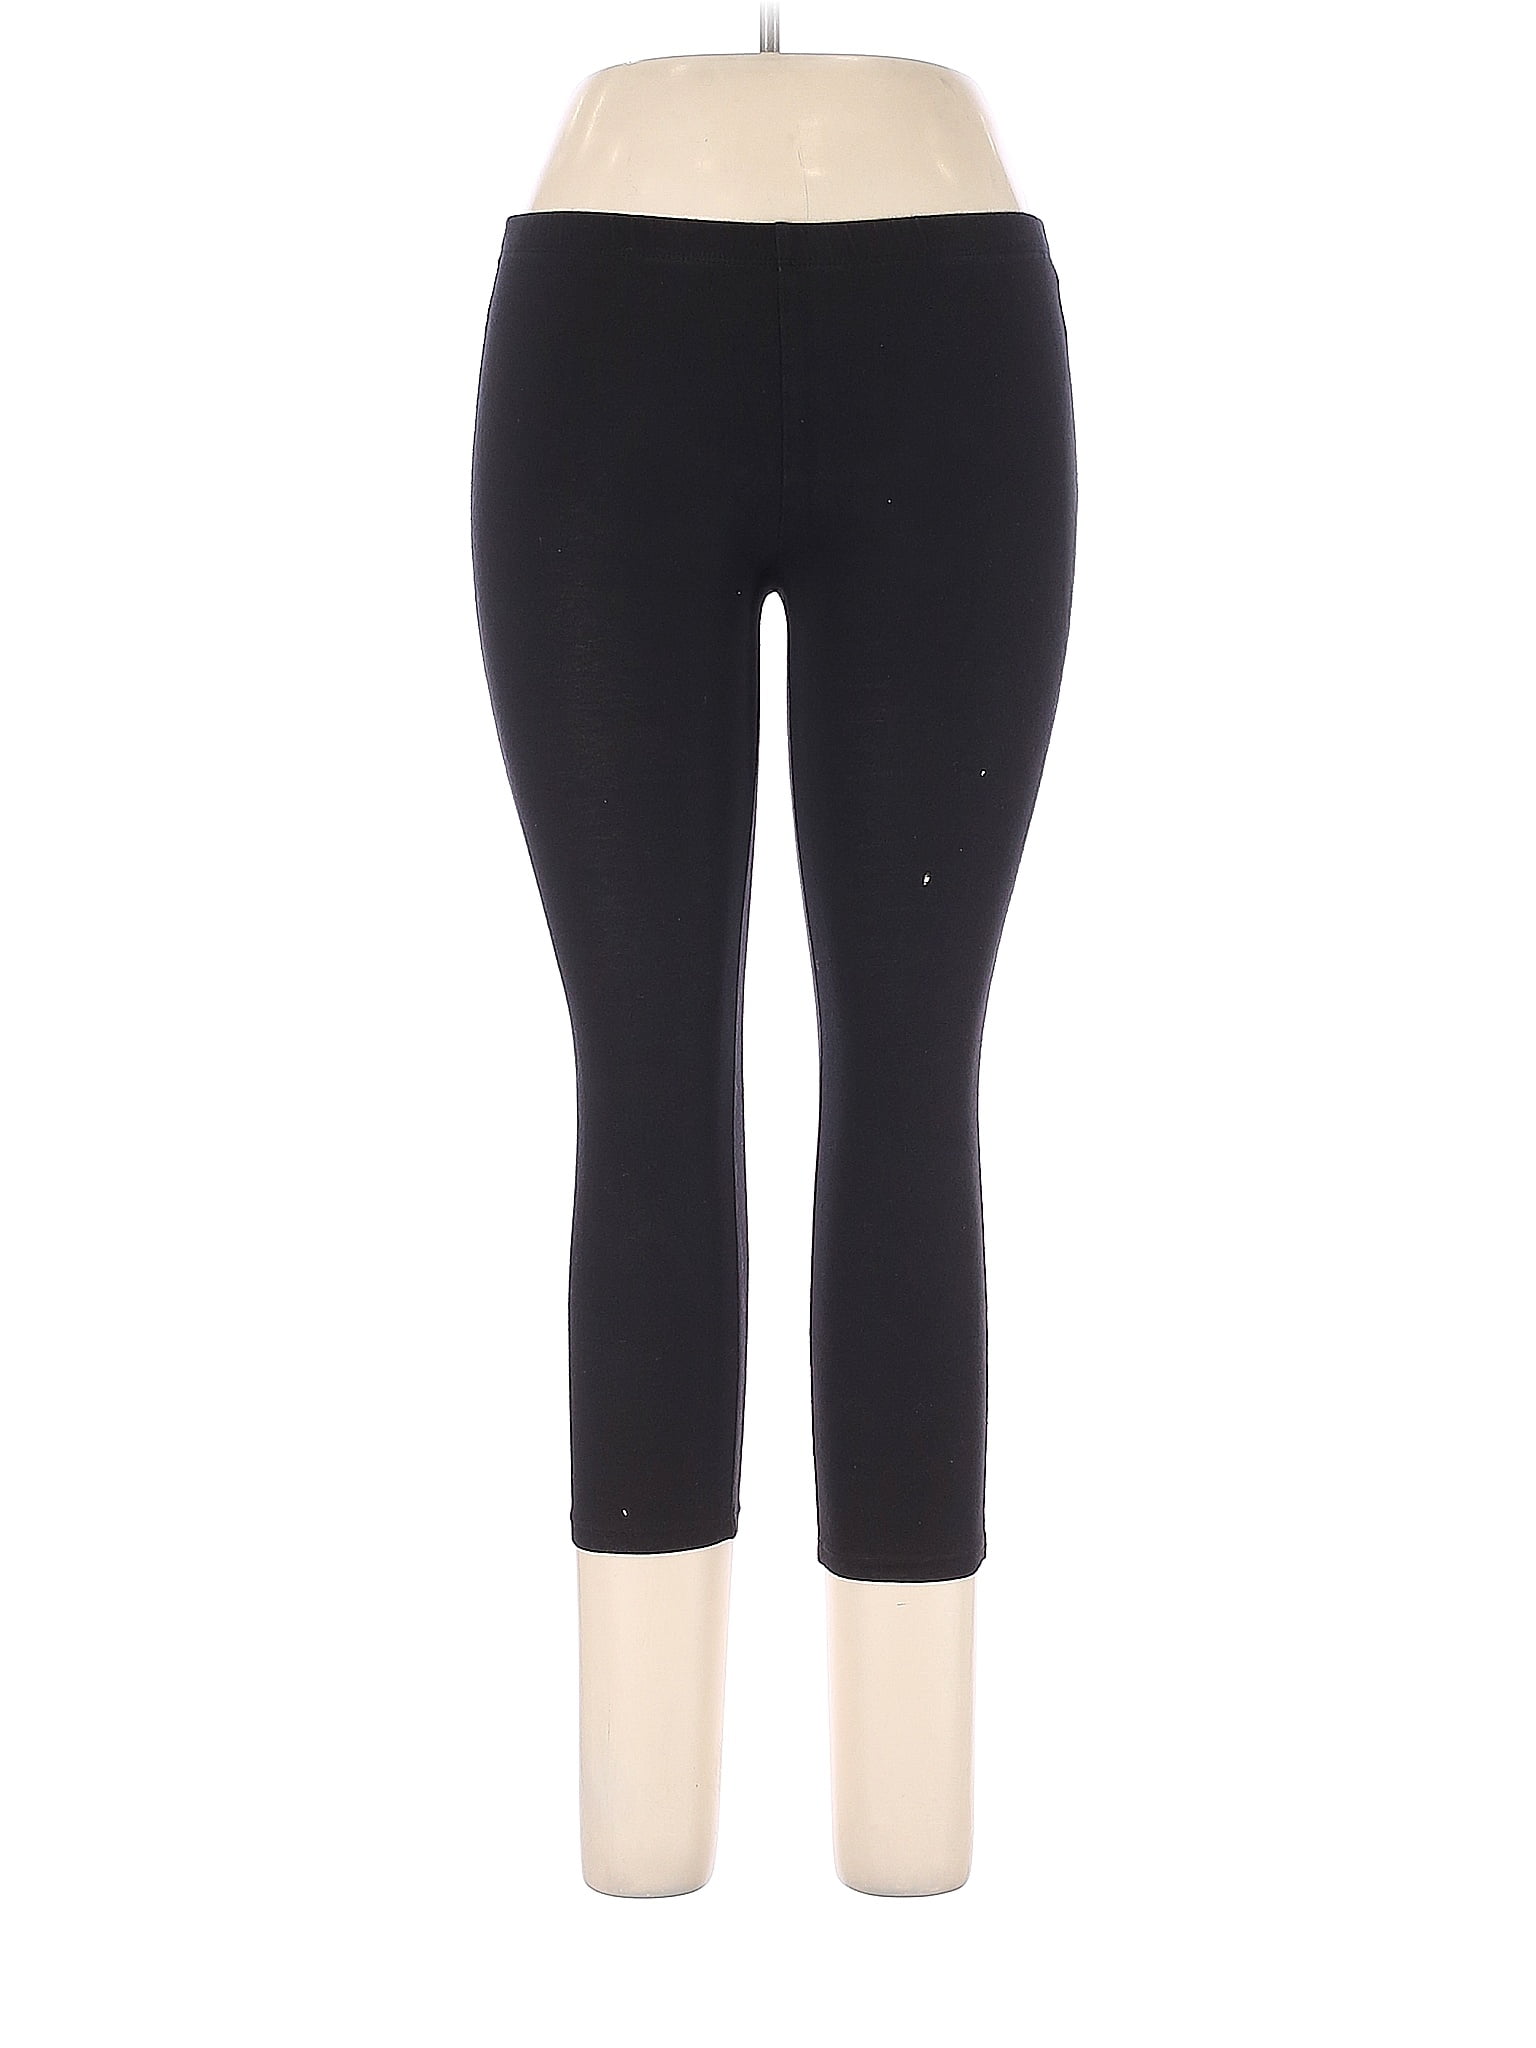 Ambiance Apparel Women's Skinny Pants On Sale Up To 90% Off Retail